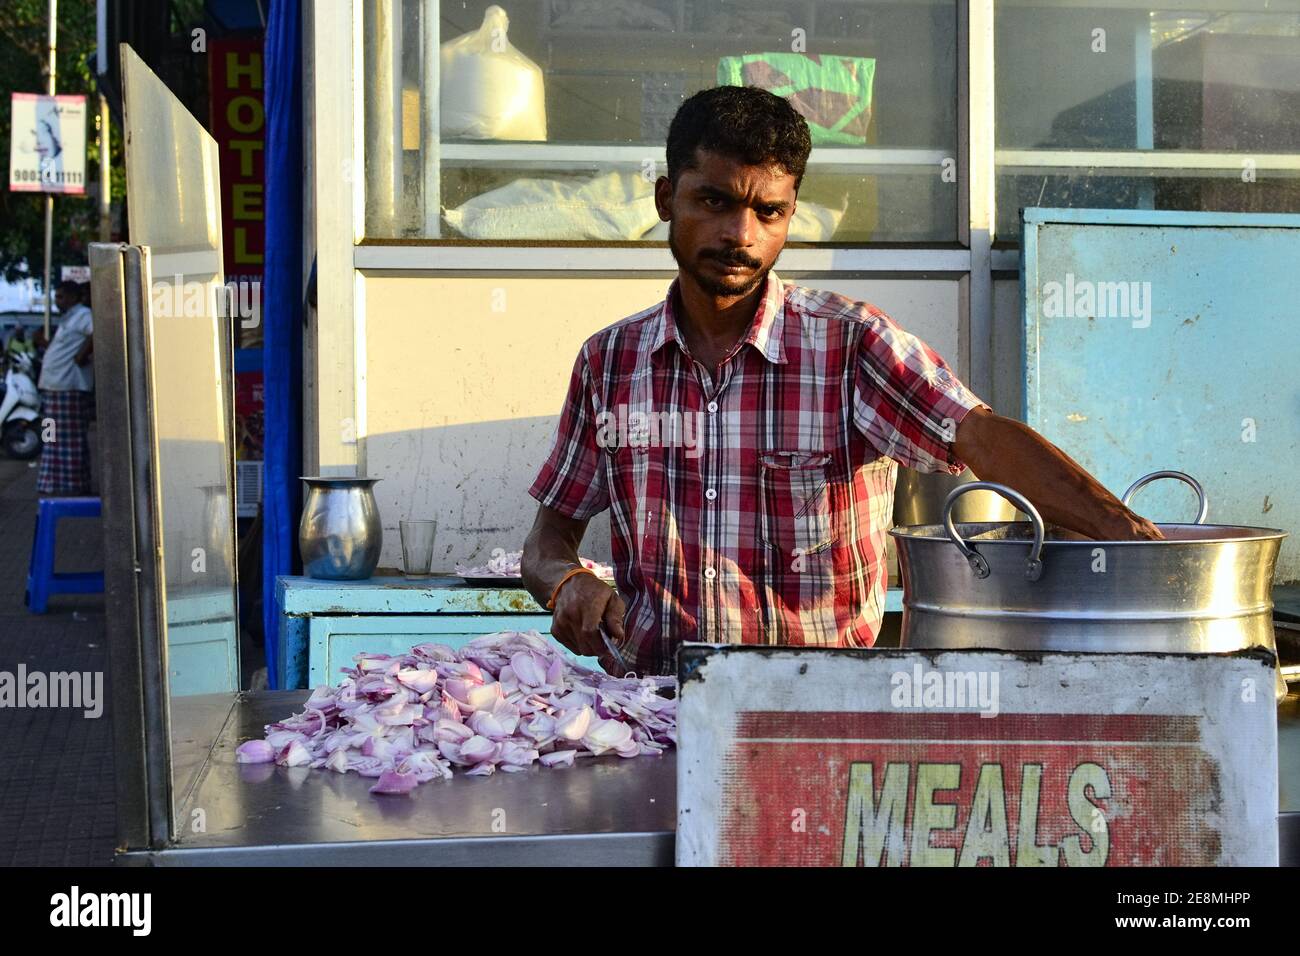 Kanyakumari, Tamil Nadu, India - February, 2017: Indian man cutting onion to cook street food in small cafe on the street Stock Photo